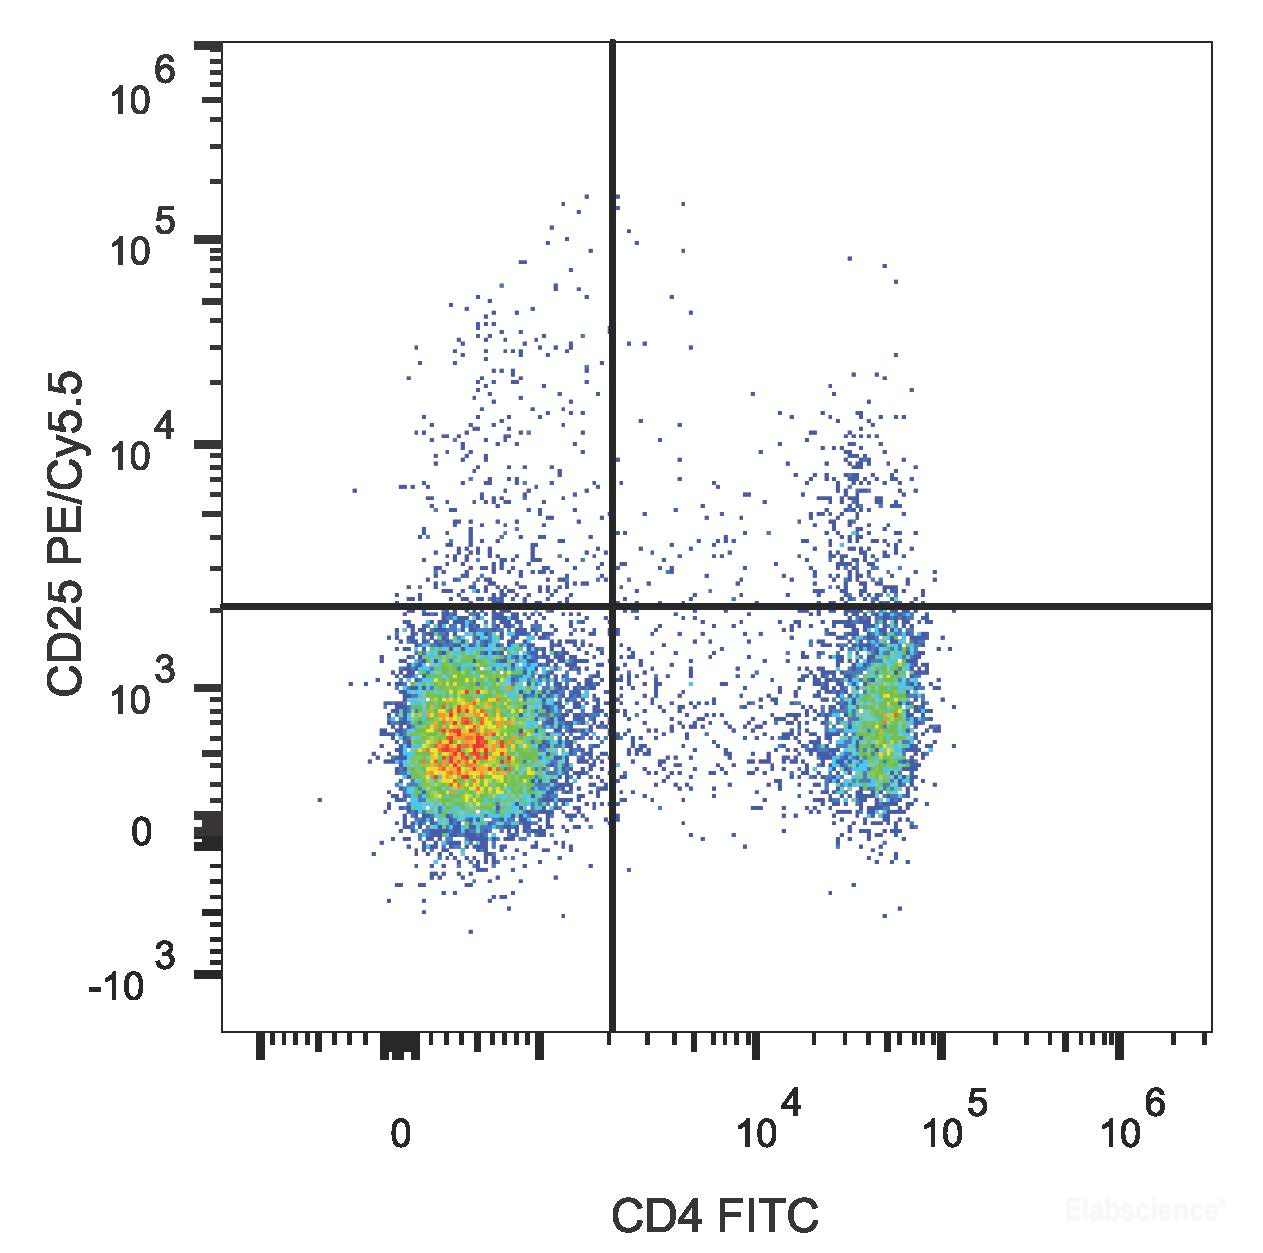 C57BL/6 murine splenocytes are stained with PE/Cyanine5.5 Anti-Mouse CD25 Antibody and FITC Anti-Mouse CD4 Antibody.